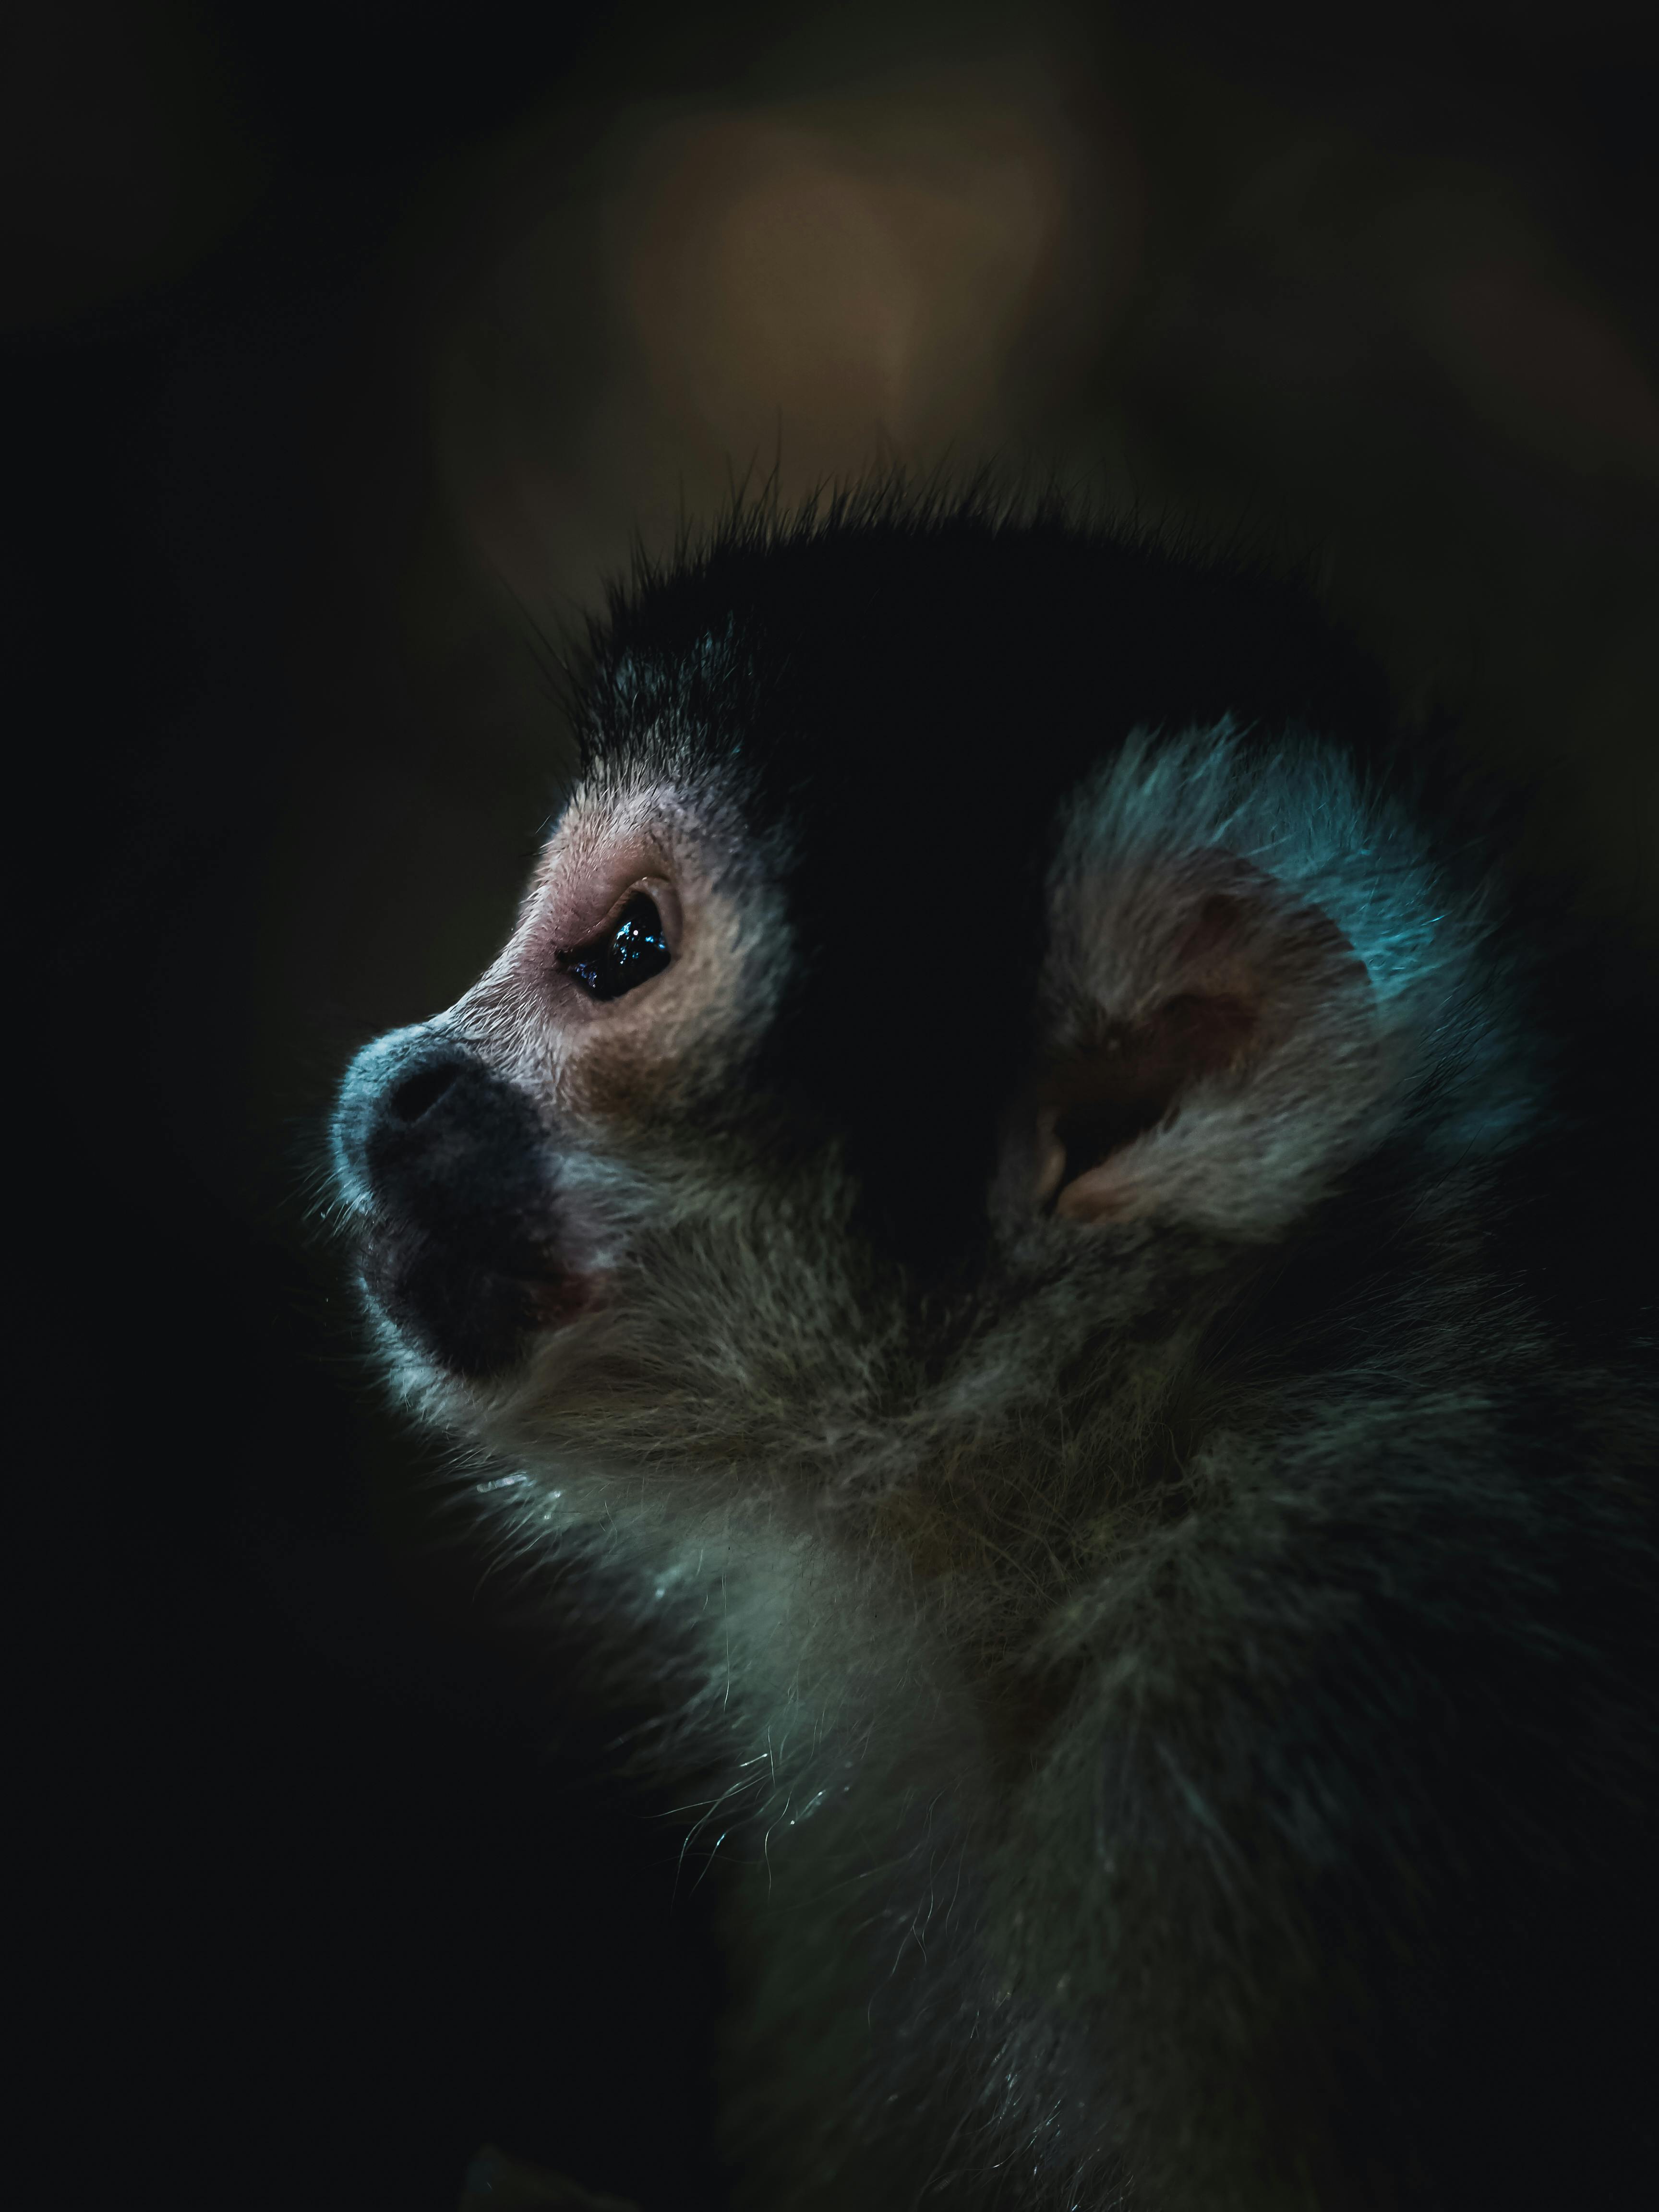 Cute Little Baby Monkey Face Cute Animal Wallpaper Hd Stock Photo   Download Image Now  iStock